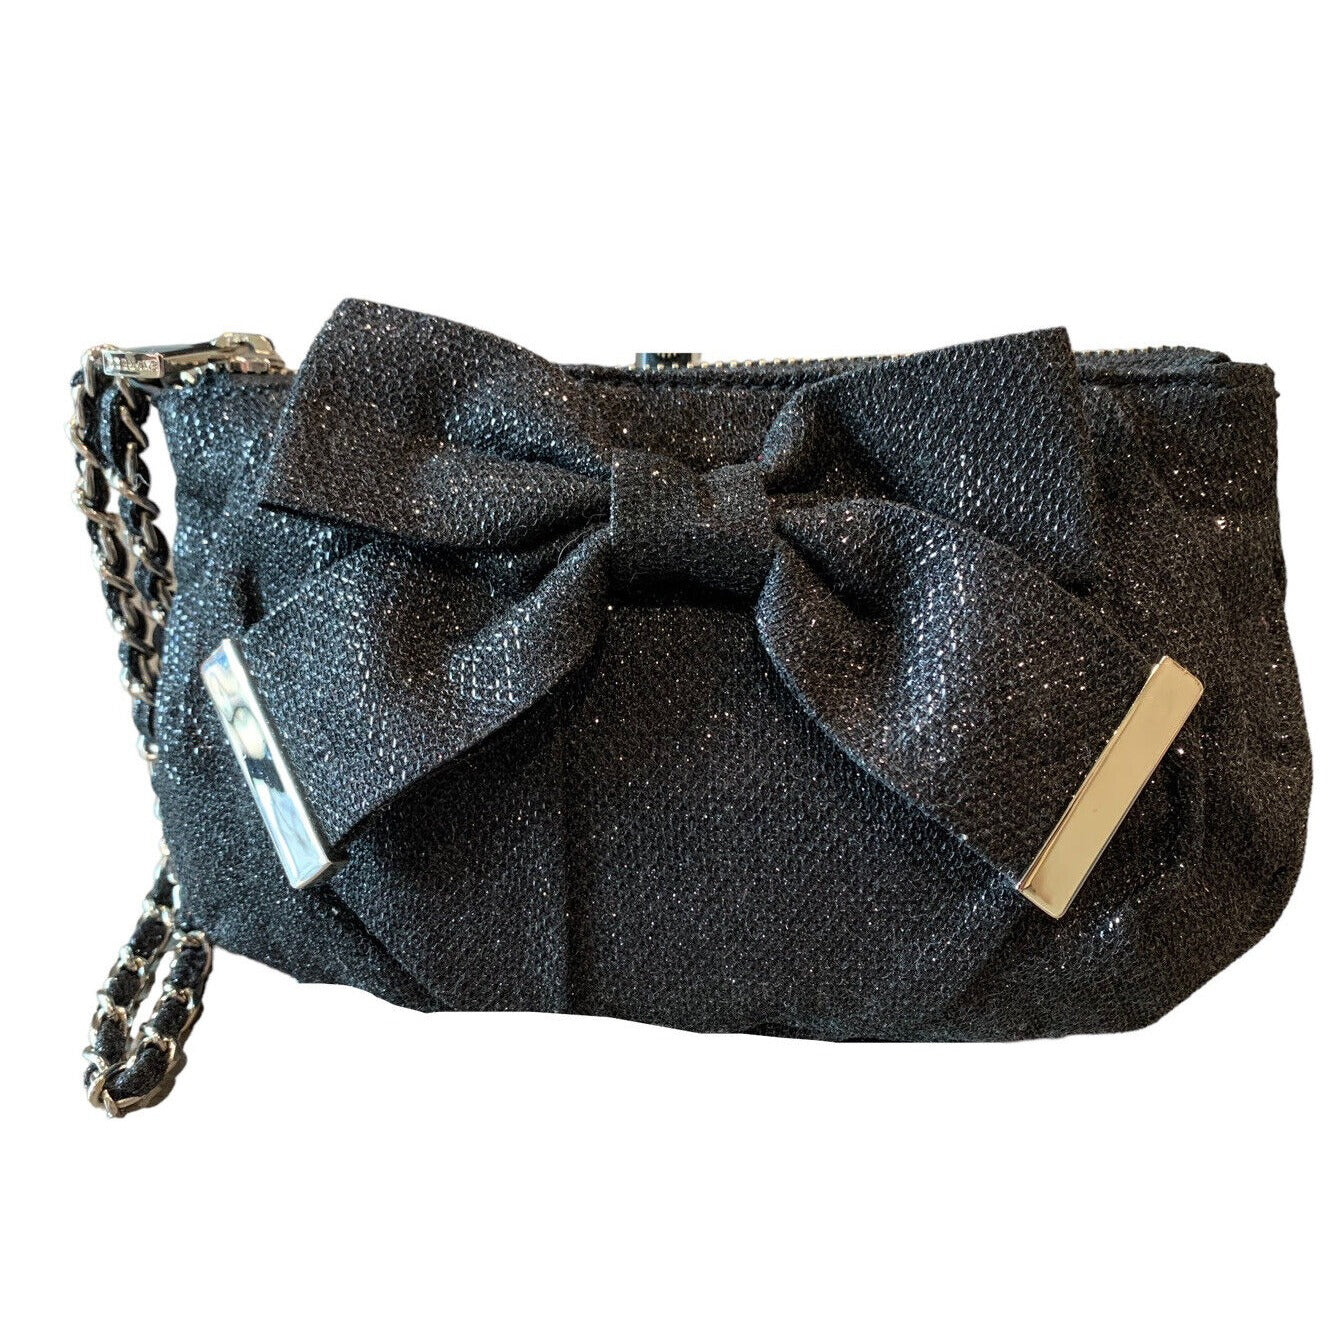 Express Glam Sparkle Wristlet Handbag With Large Bow Accent